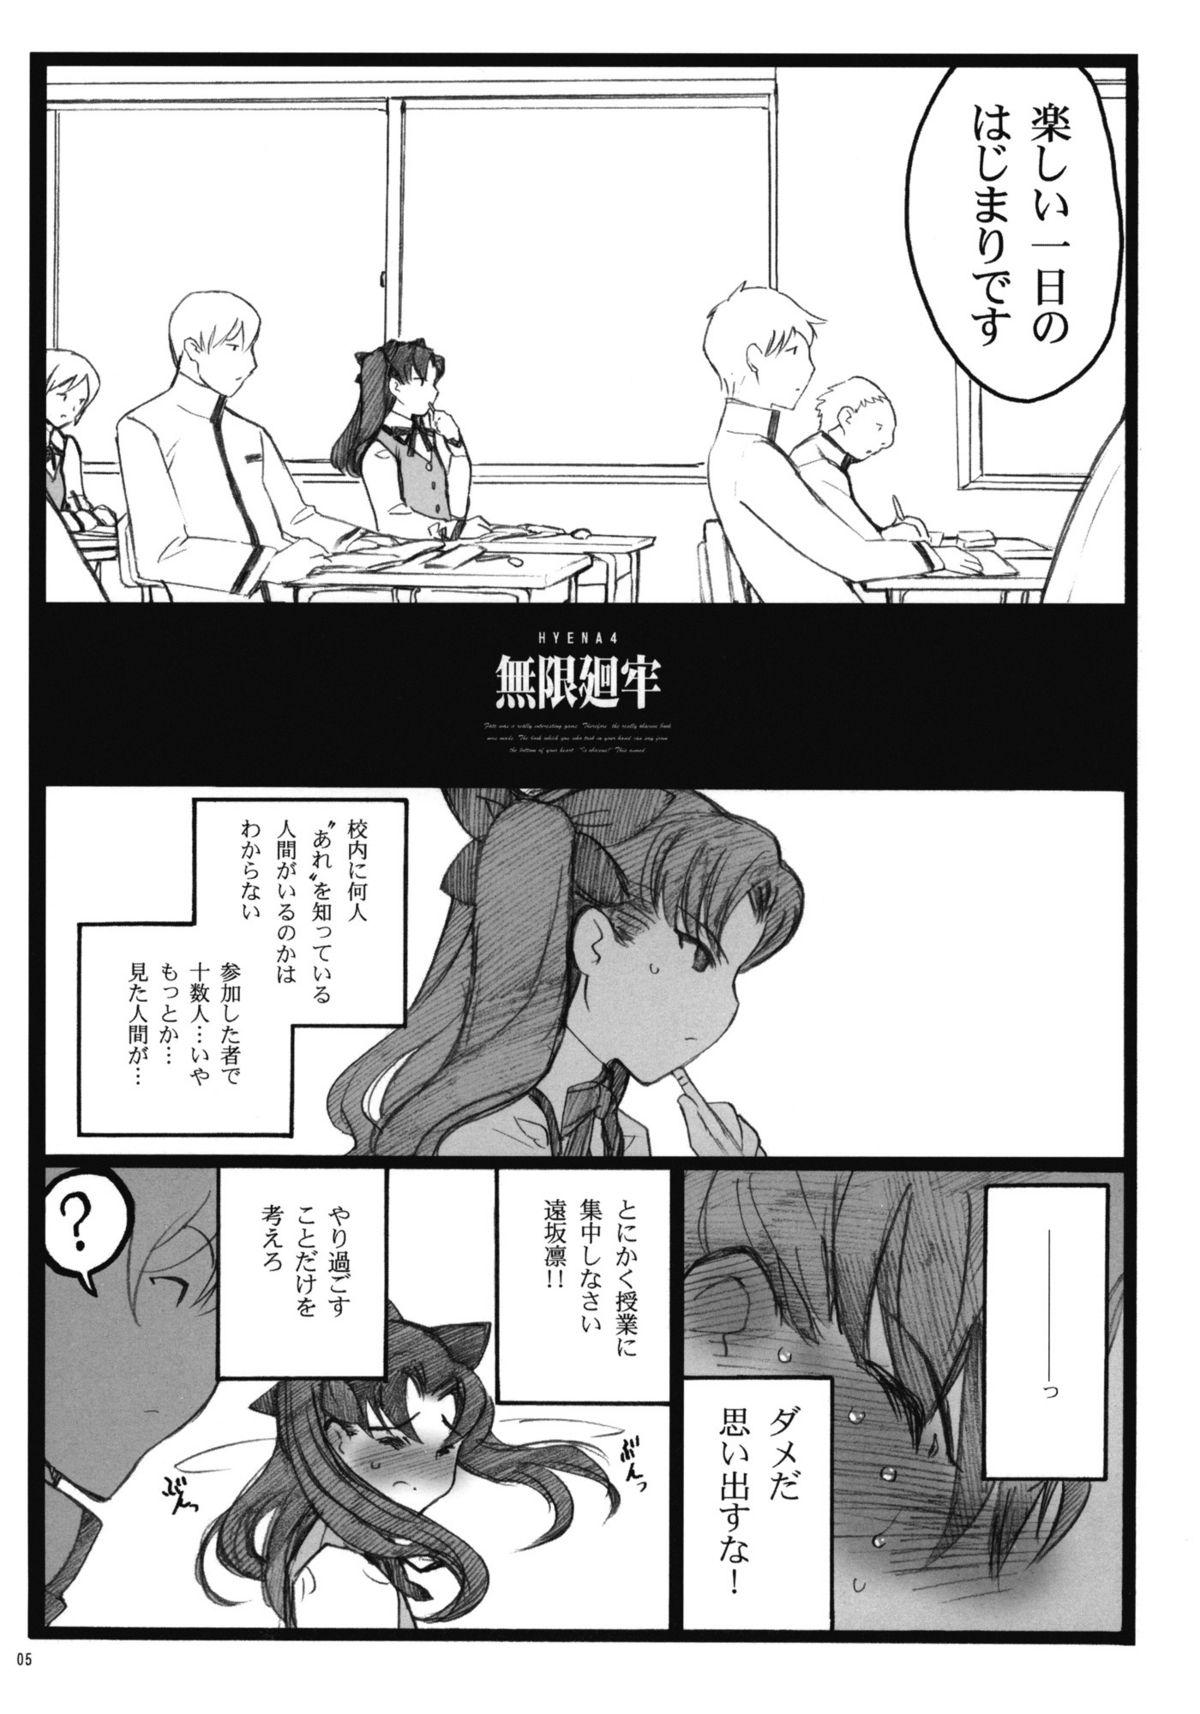 Colombia Walpurgisnacht 4 - Fate stay night Lesbian - Page 4